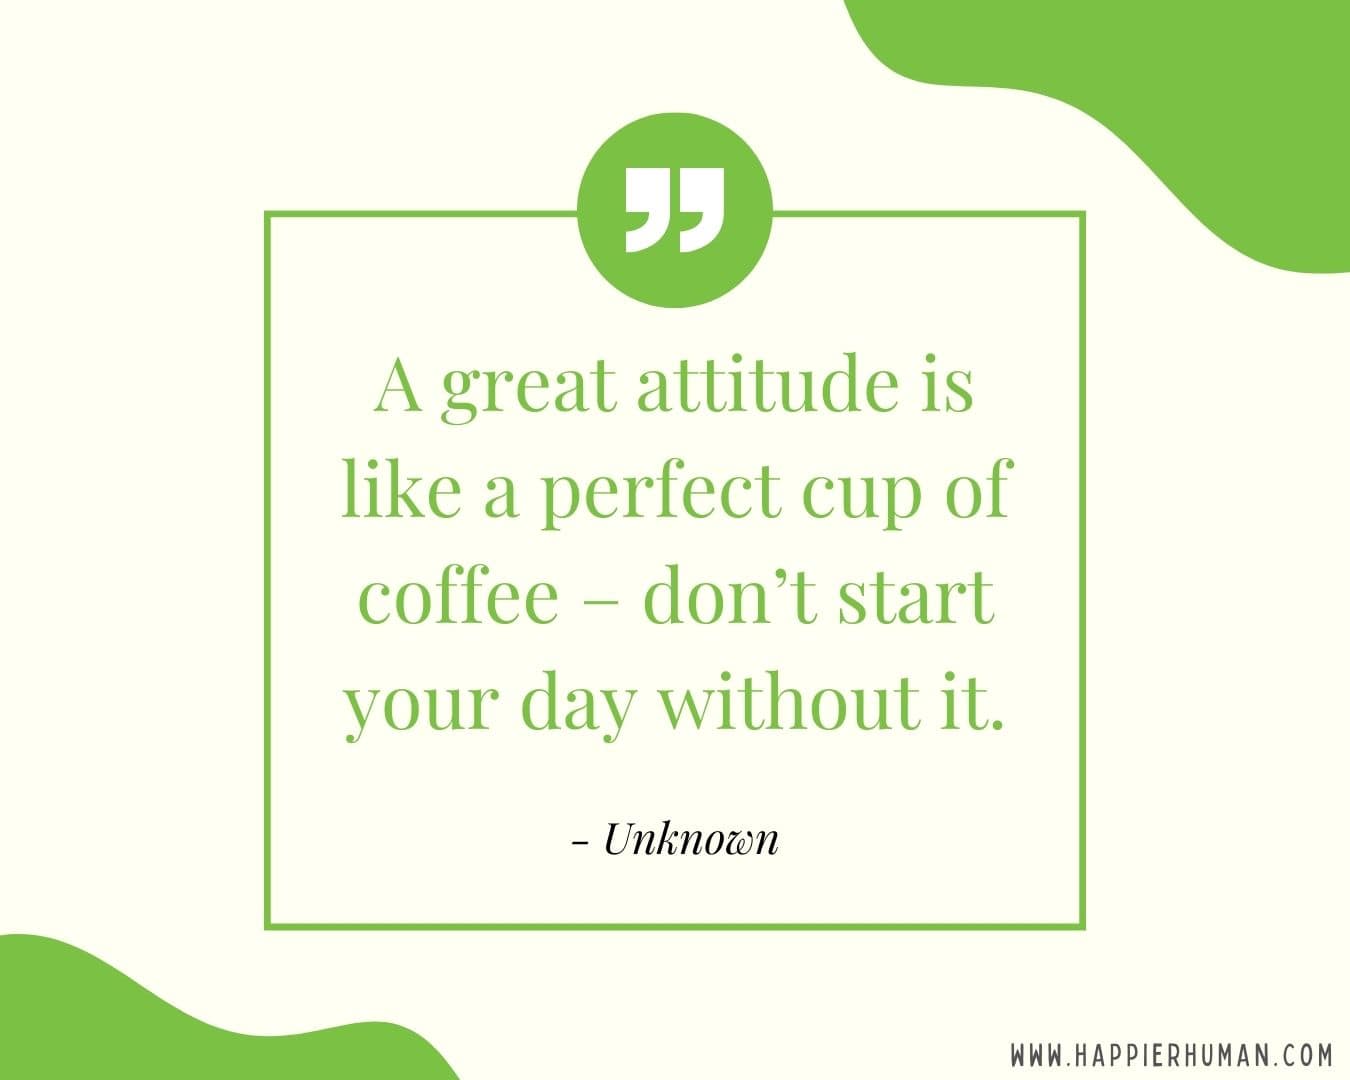 Great Day Quotes - “A great attitude is like a perfect cup of coffee – don’t start your day without it.” – Unknown